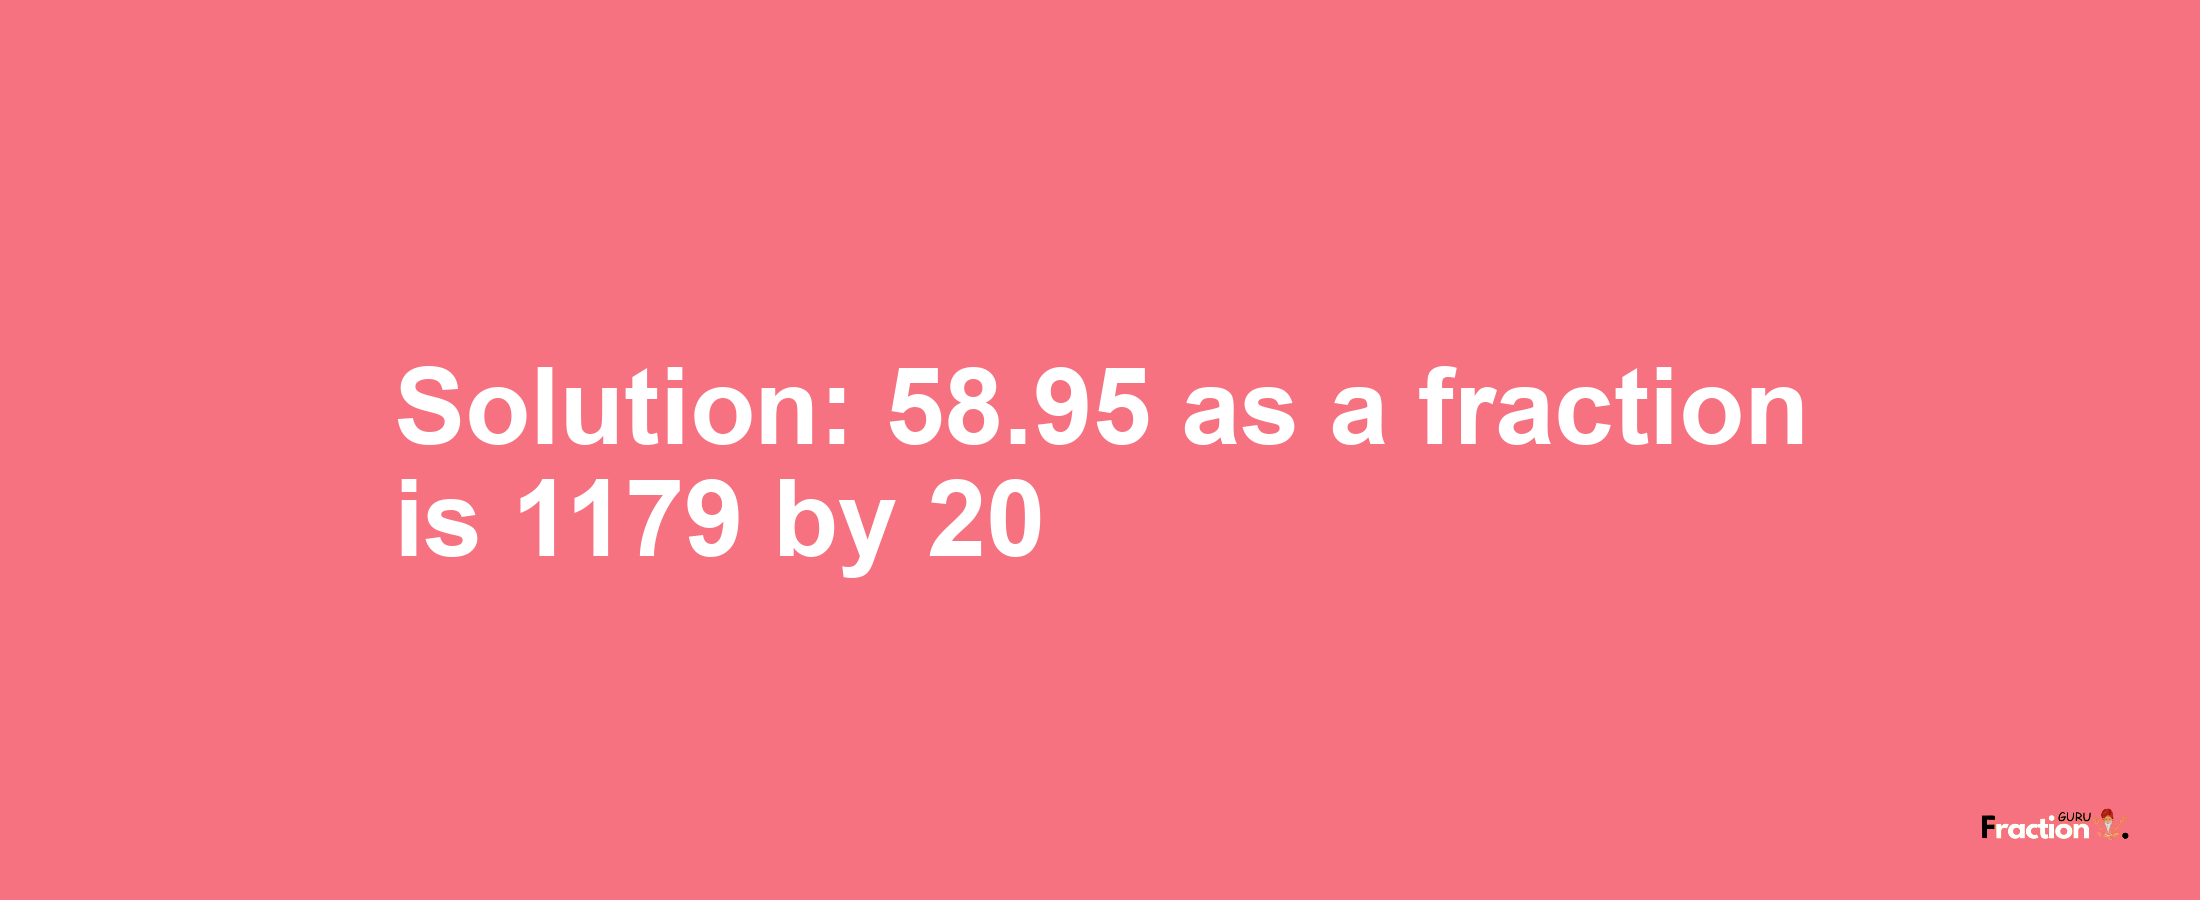 Solution:58.95 as a fraction is 1179/20